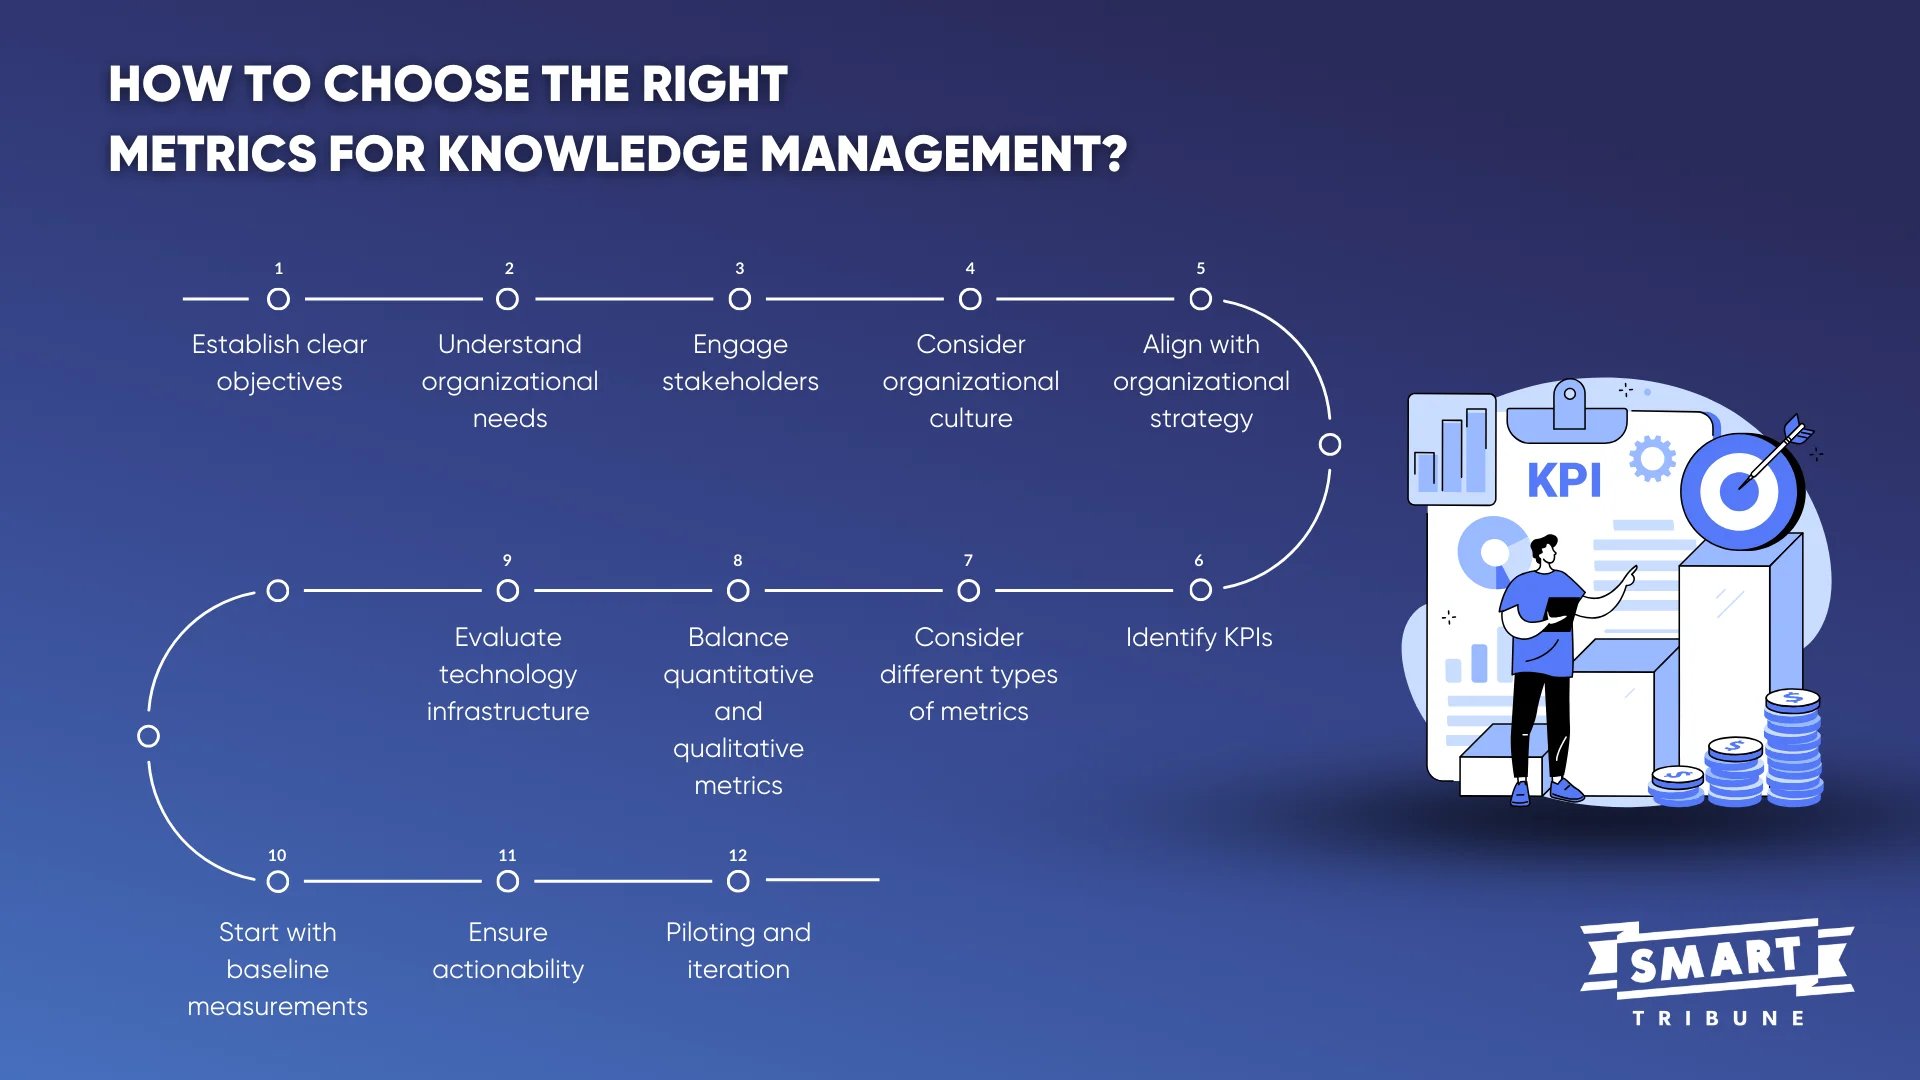 How to choose the right metrics for knowledge management